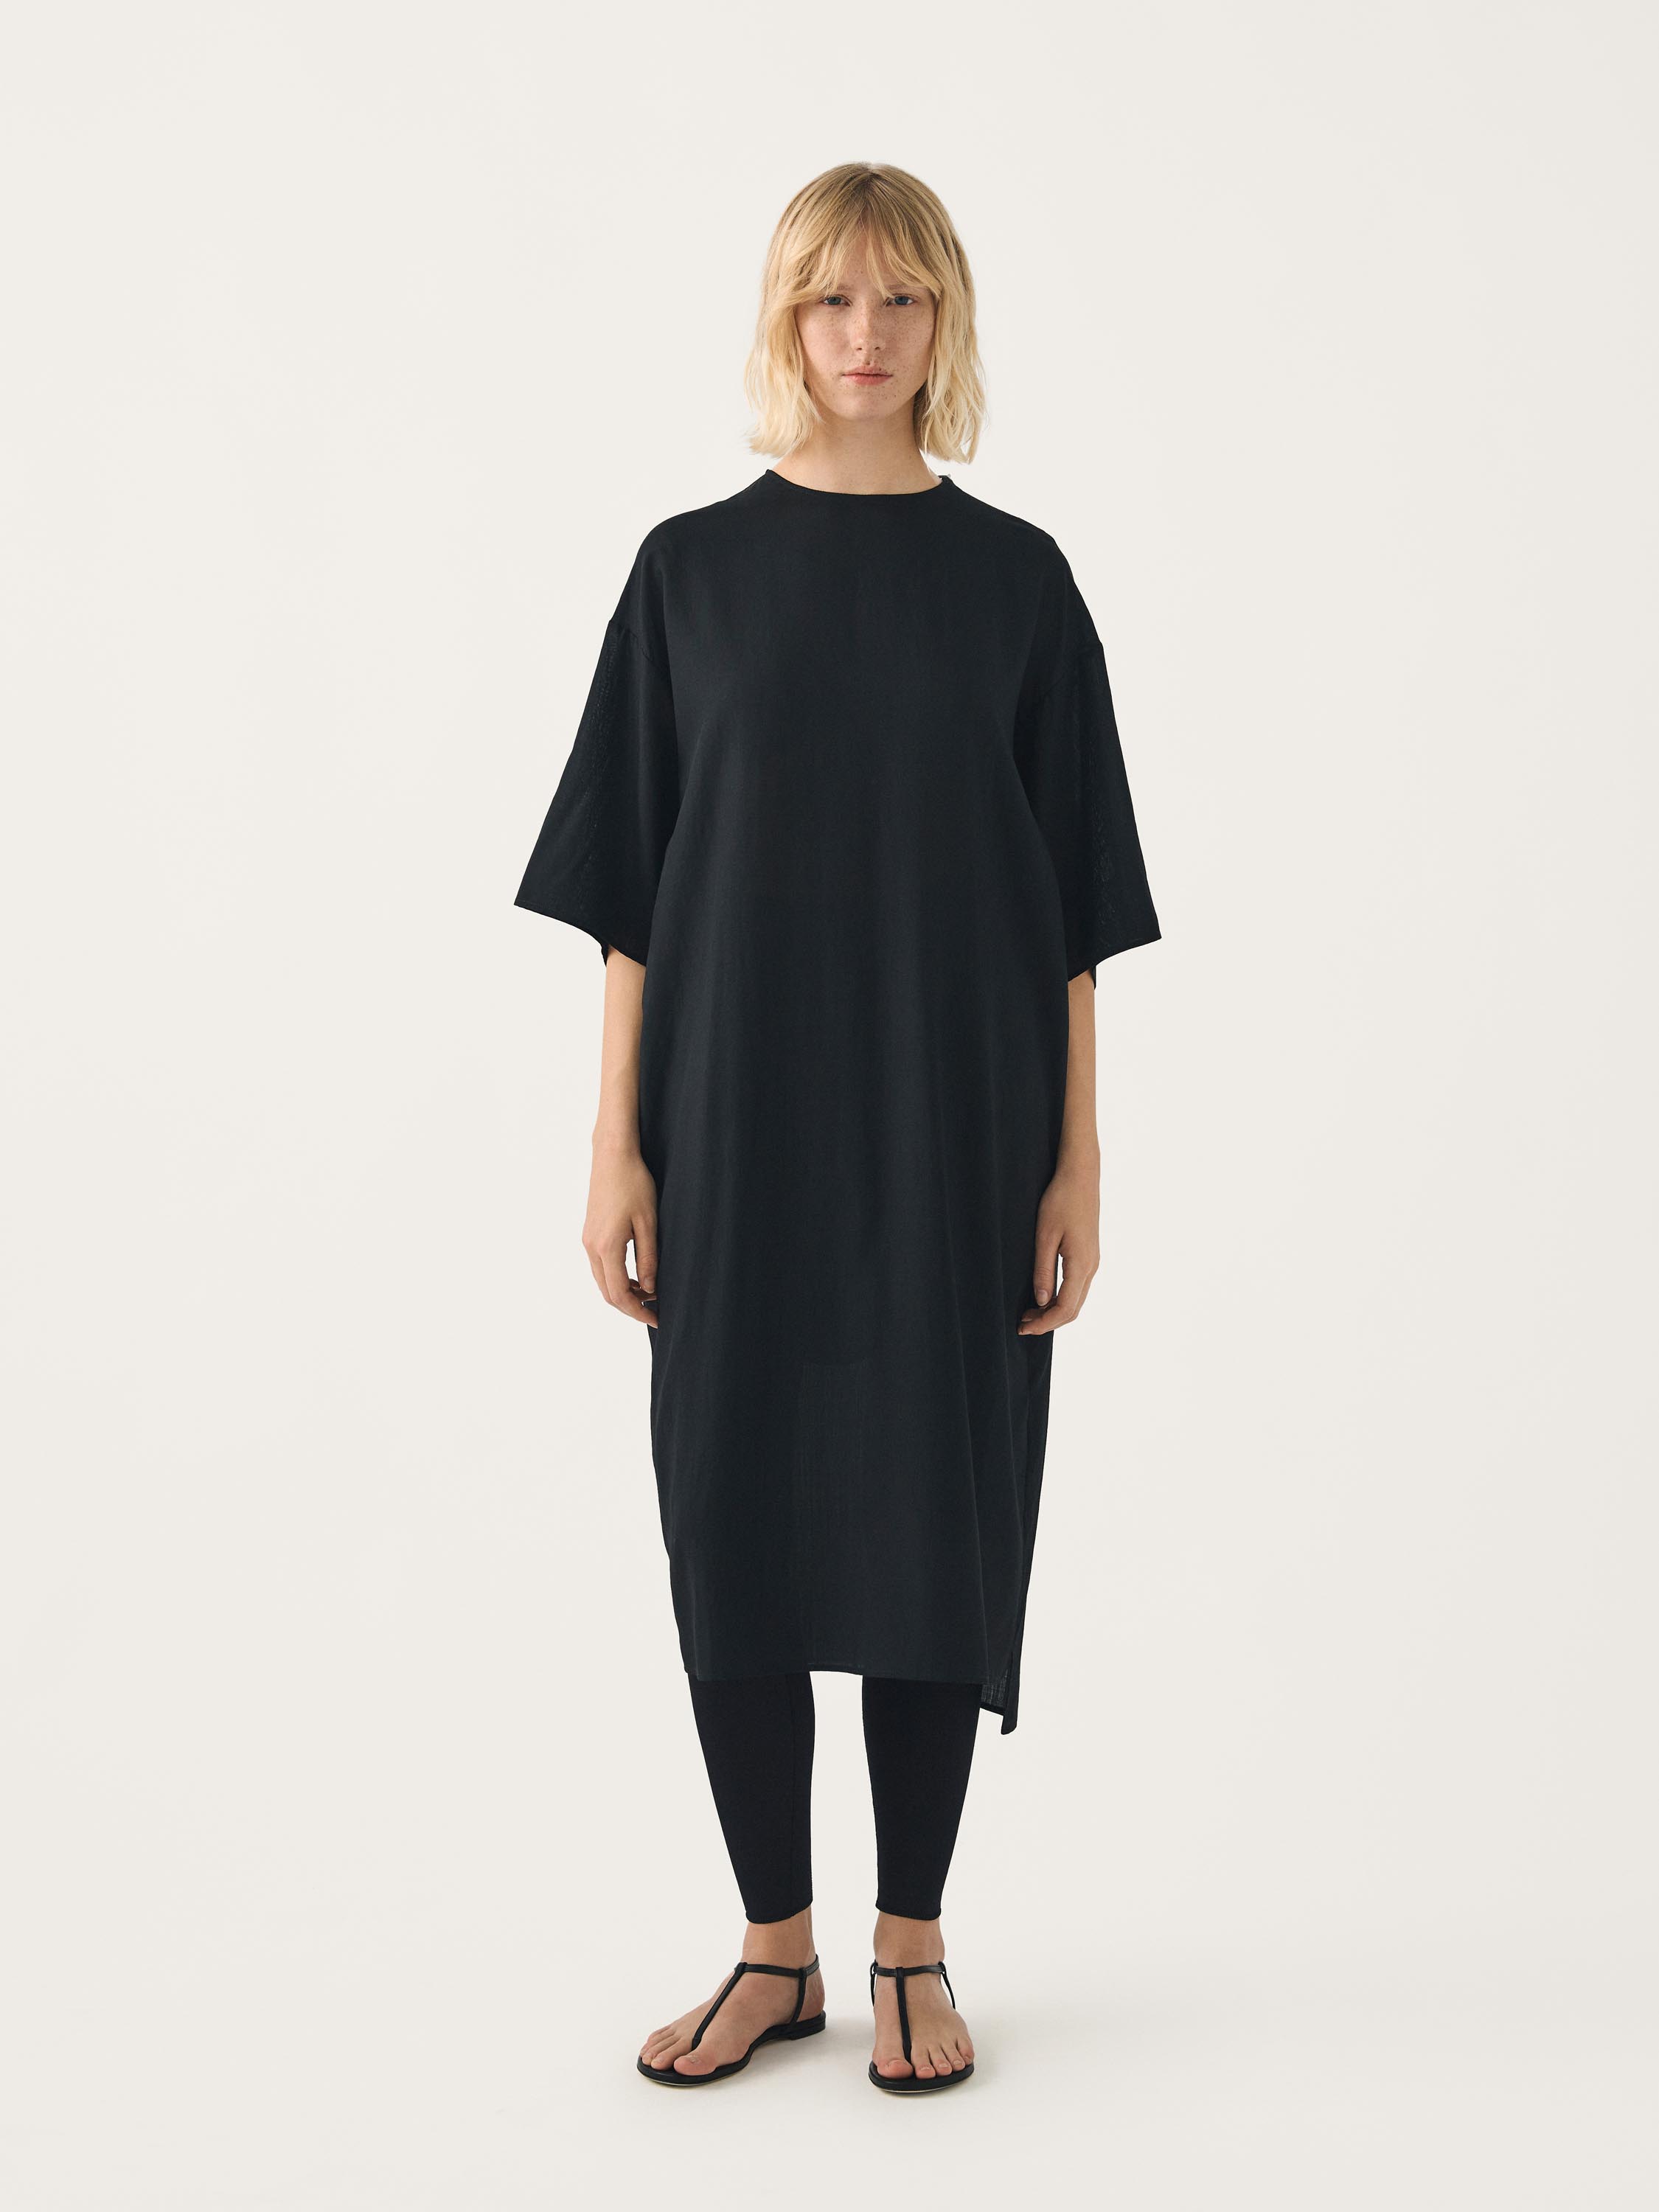 KEON woven t-shirt dress | FFORME sleeves with elbow-length